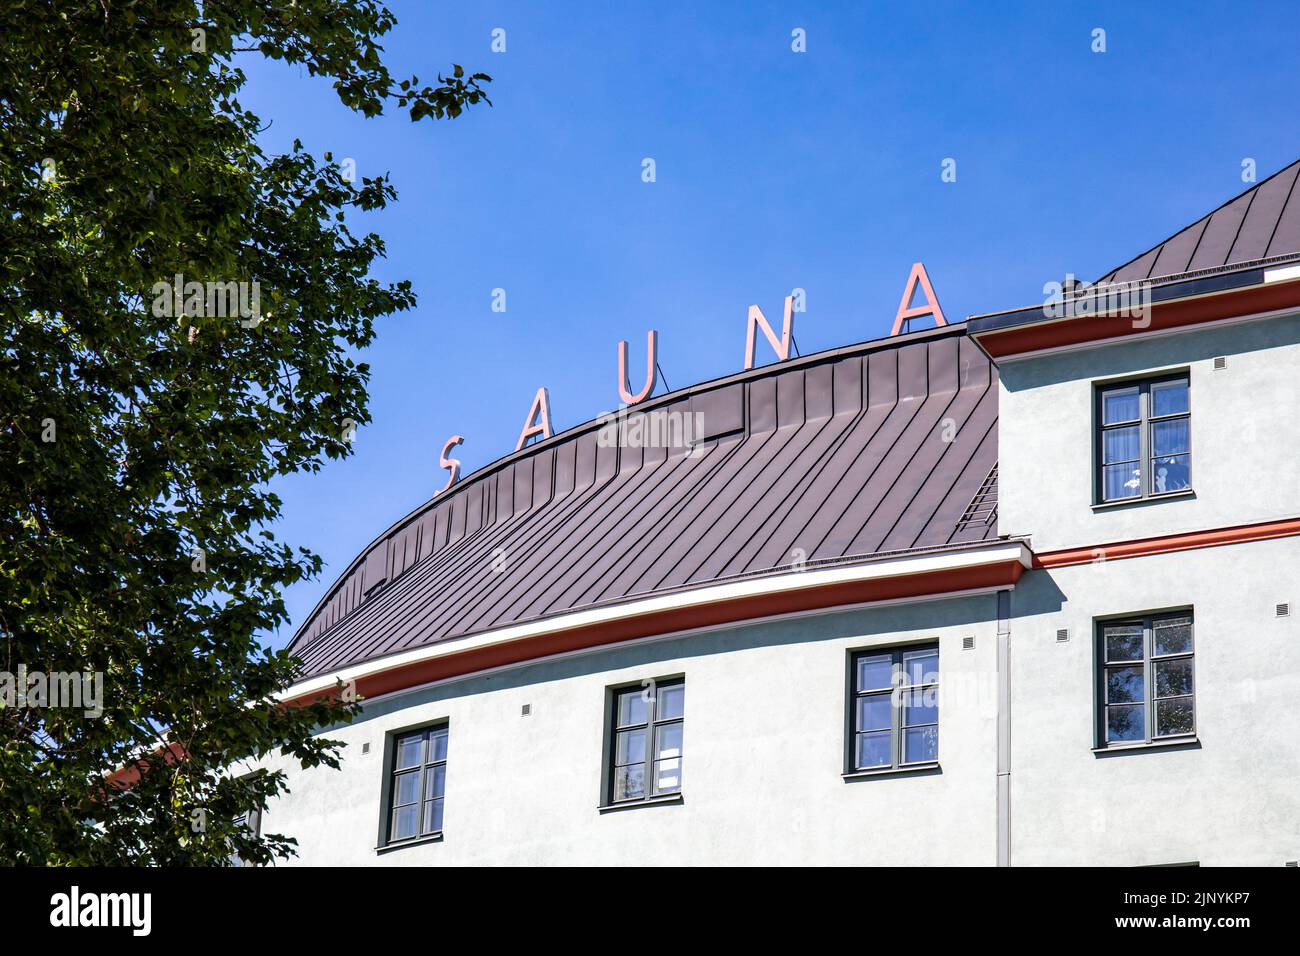 Sauna letters on the roof of a residential building in Kallio district of Helsinki, Finland Stock Photo